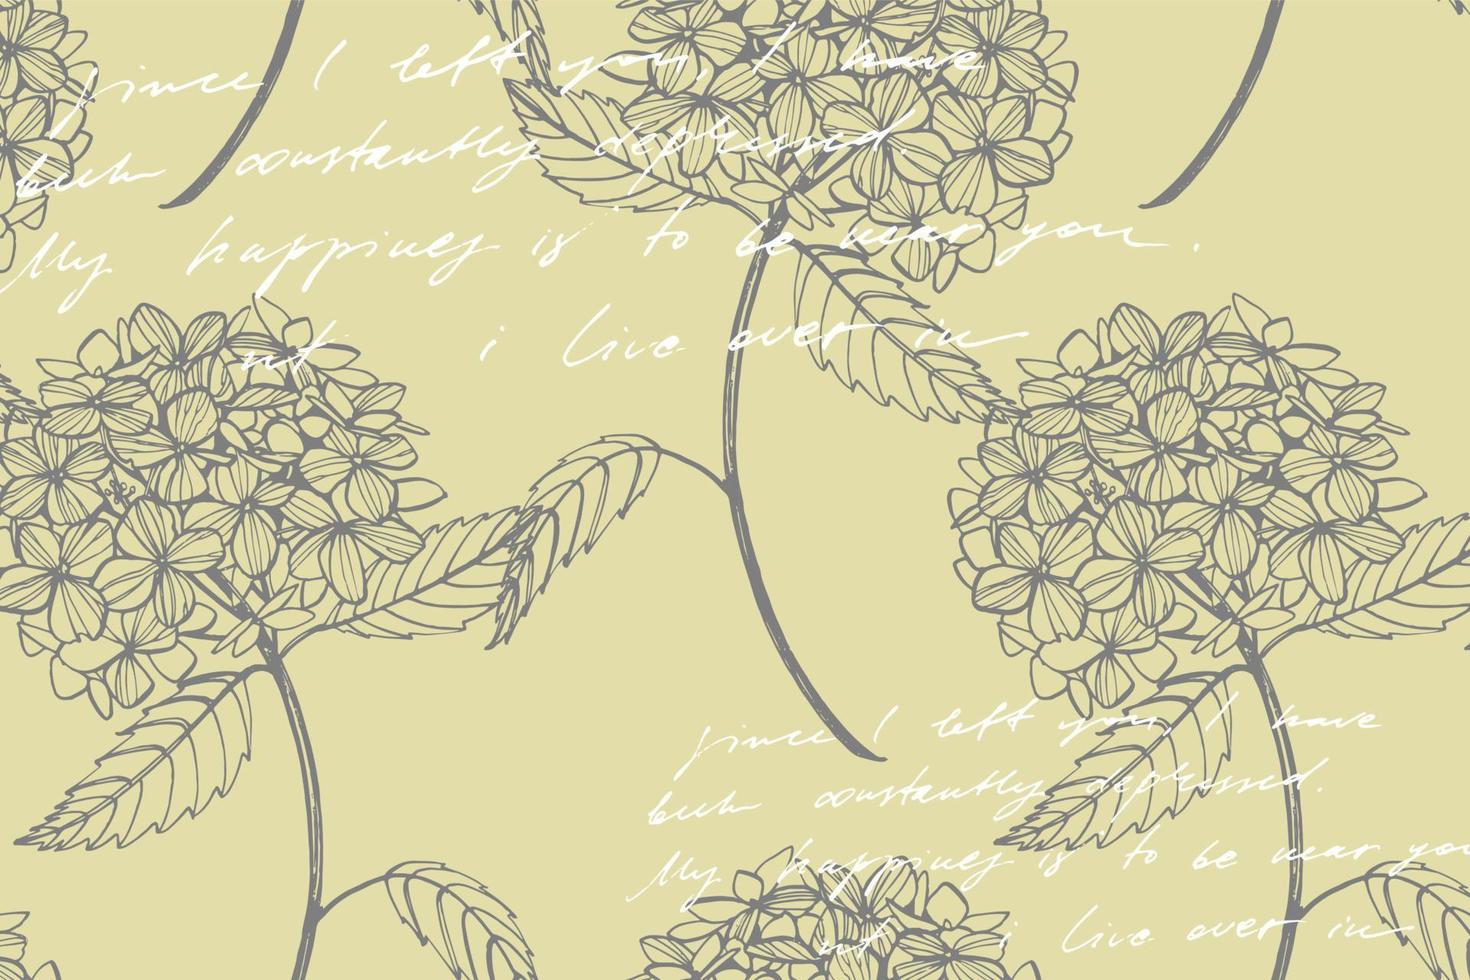 Hydrangea graphic illustration in vintage style. Flowers drawing and sketch with line-art on white backgrounds. Botanical plant illustration. Handwritten abstract text vector